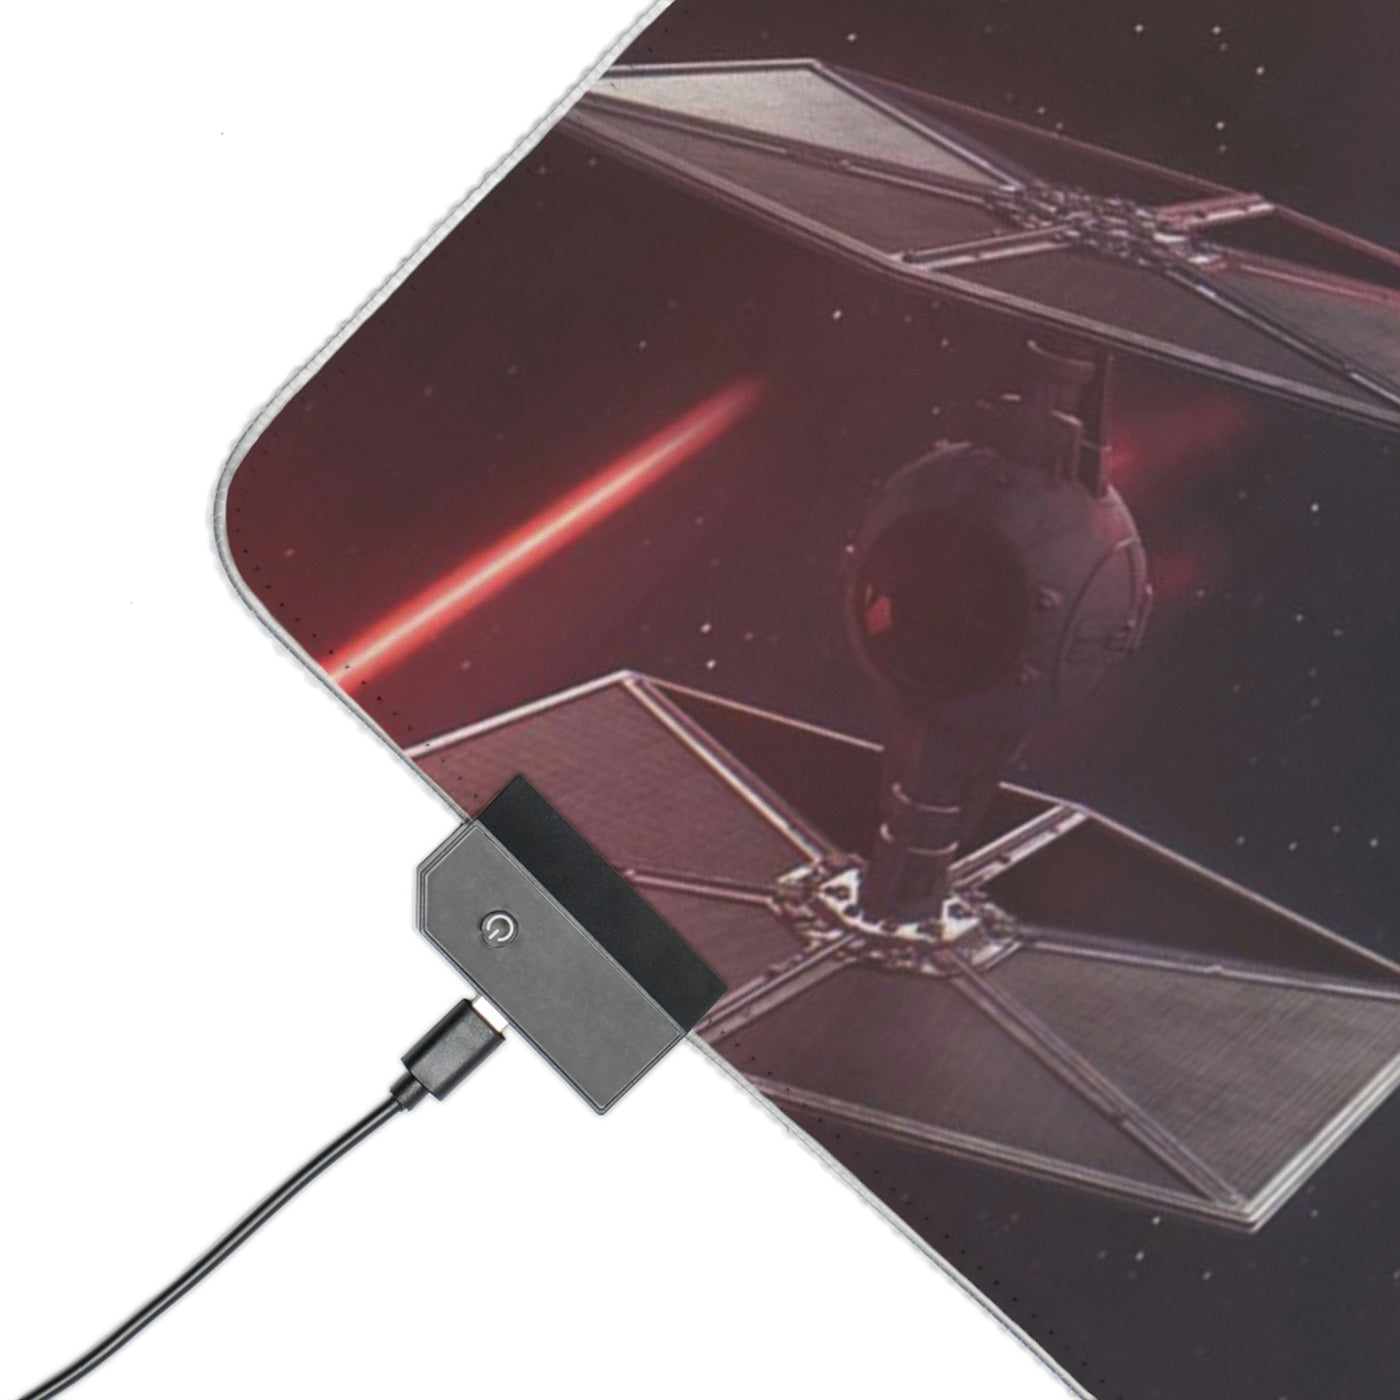 LED Gaming Mouse Pad Space X-Wing Gapo Goods